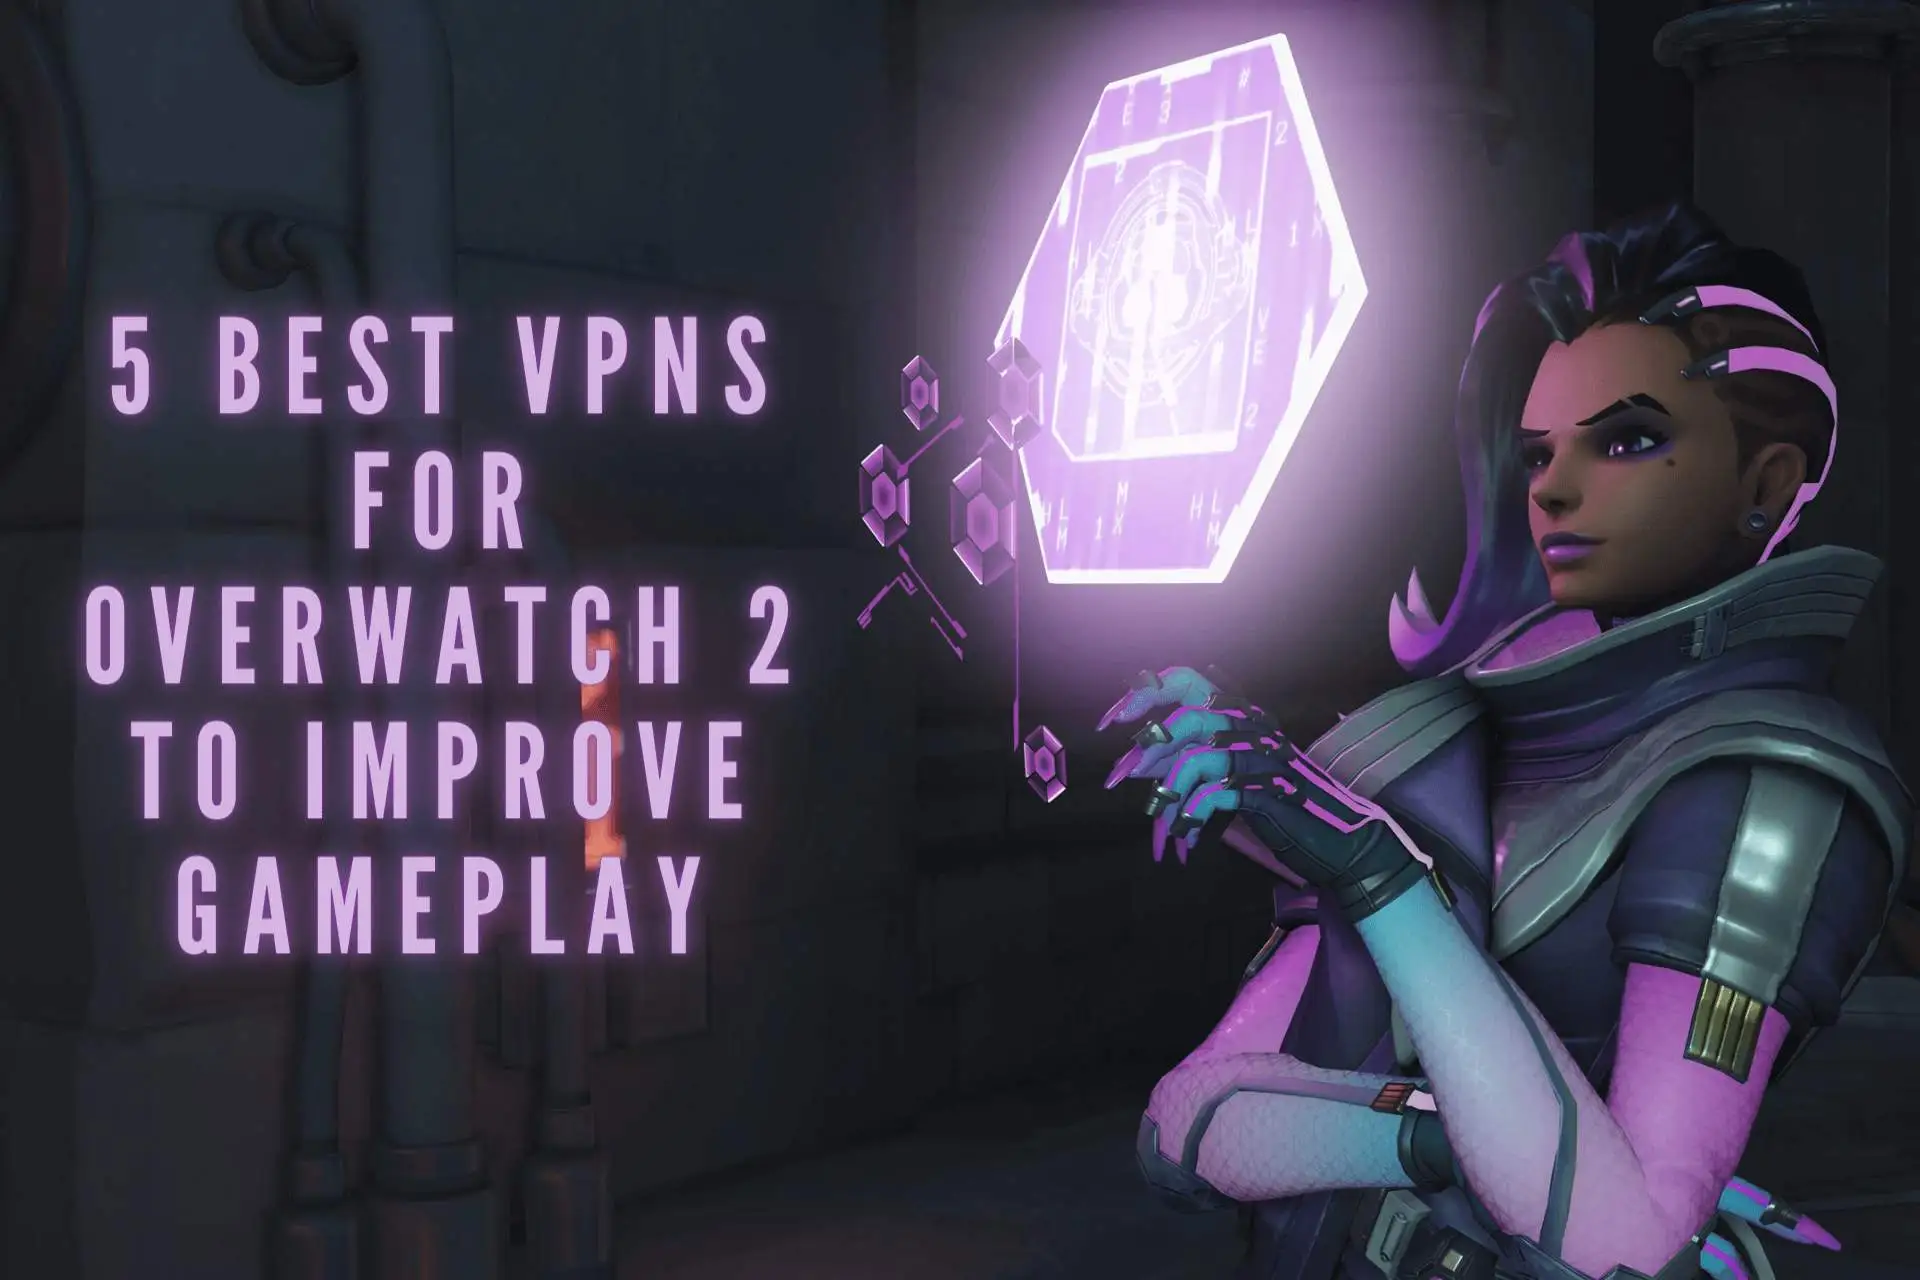 5 Best VPNs for Overwatch 2 for a Lag-Free Gameplay